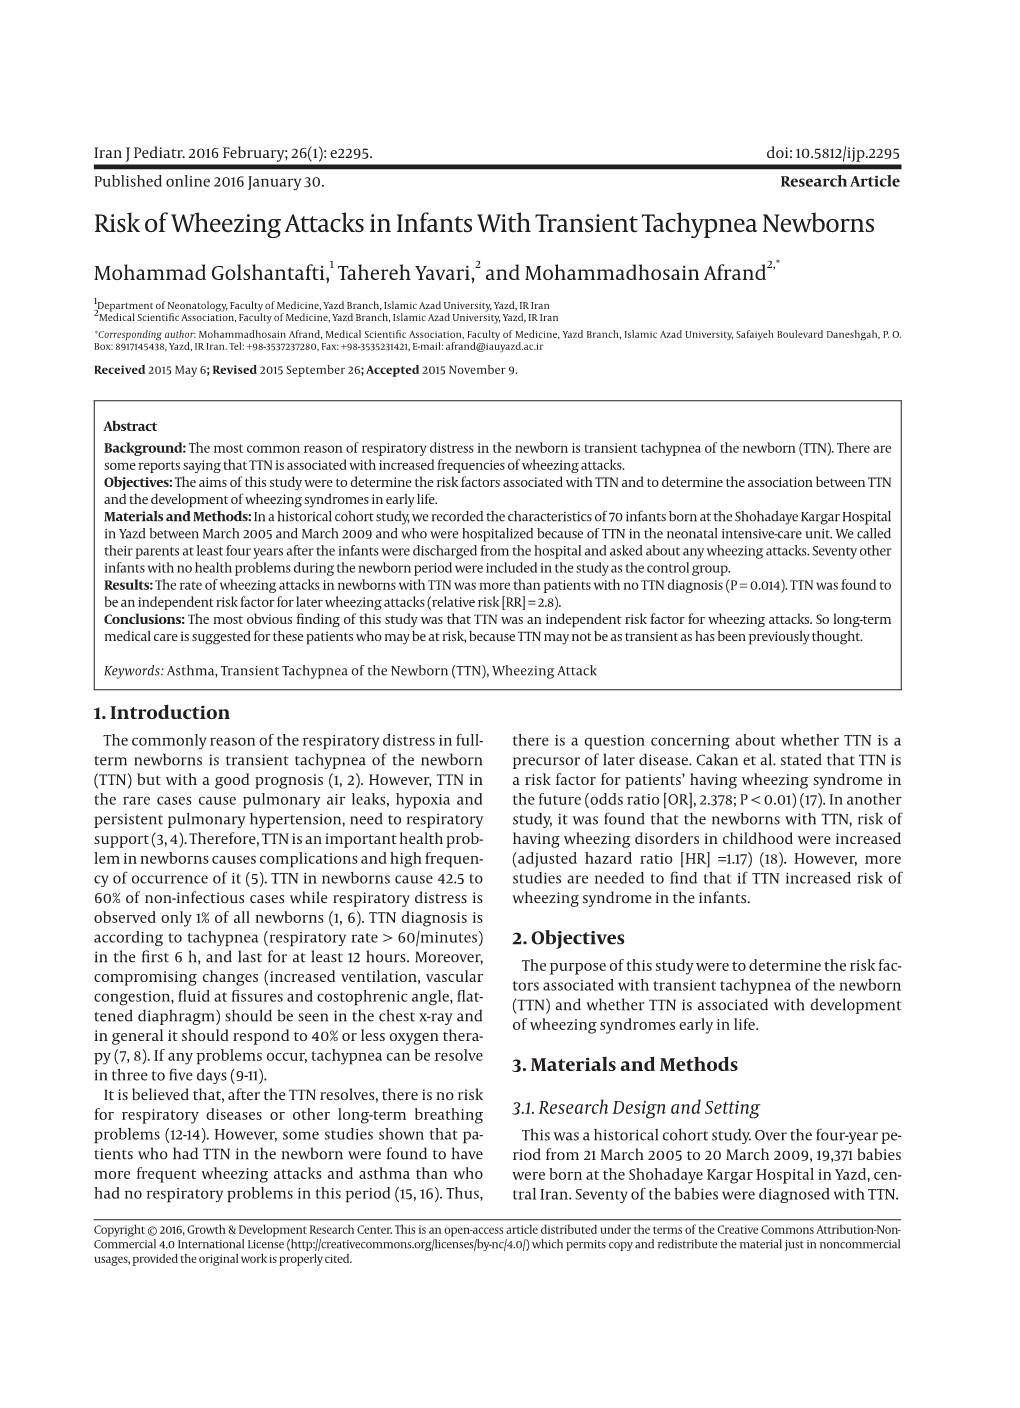 Risk of Wheezing Attacks in Infants with Transient Tachypnea Newborns